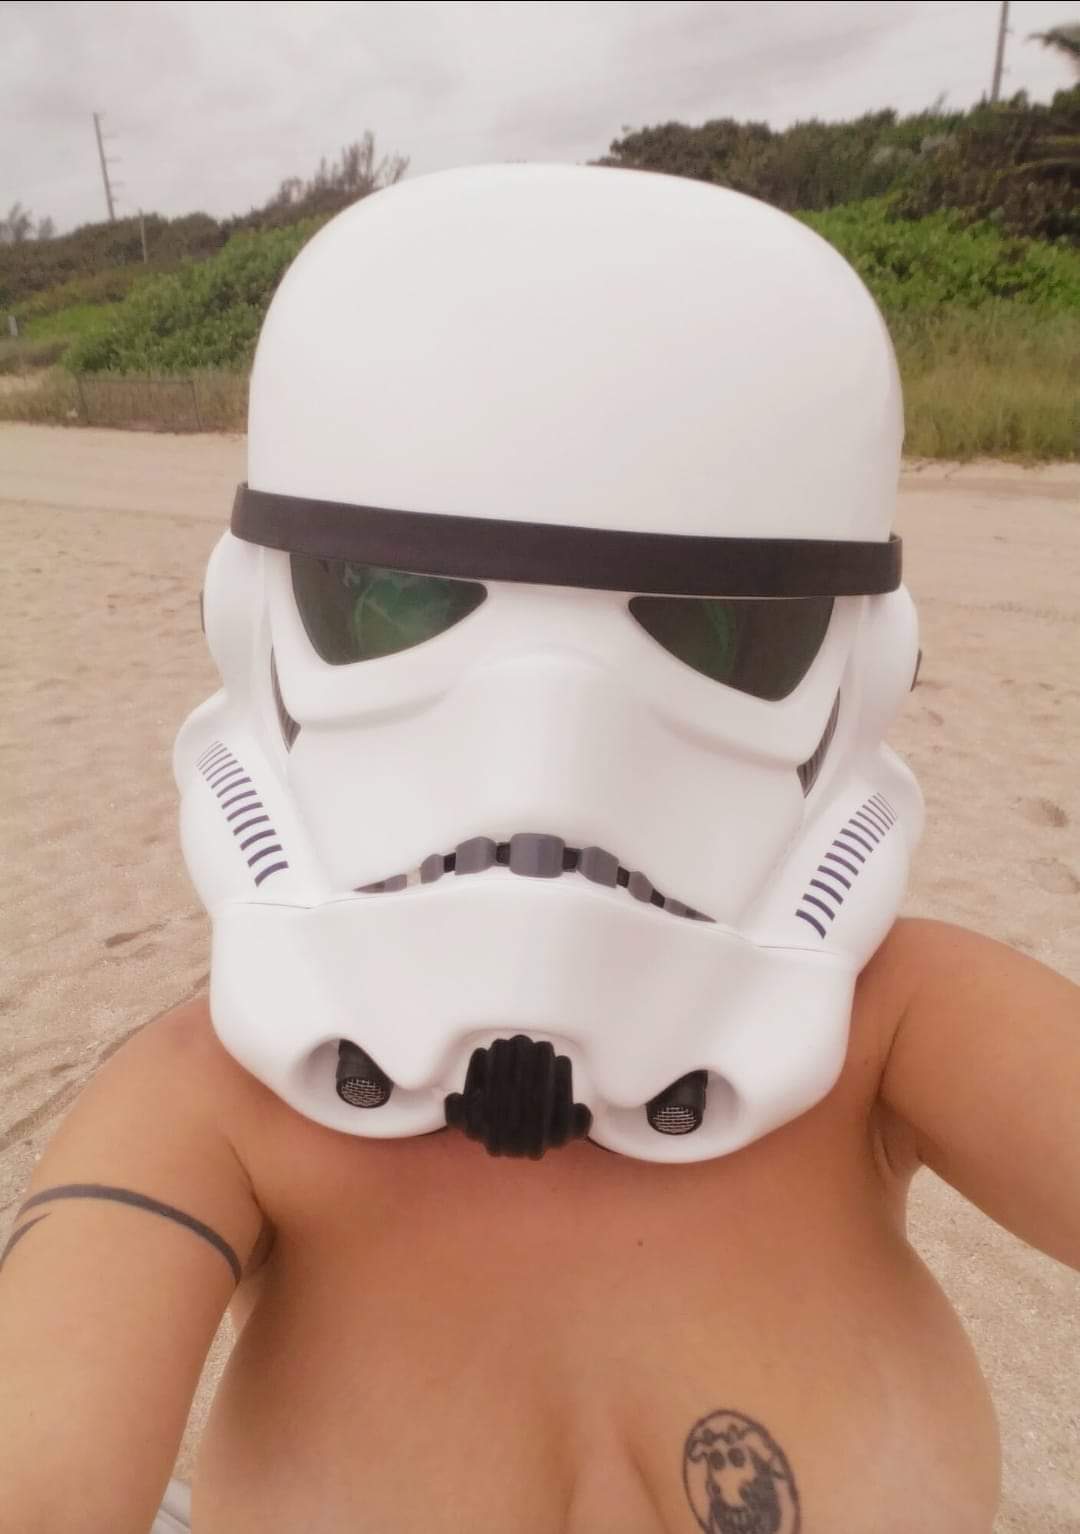 Daisy Chain Cosplay on X: Let me see your identification. ⬇️⬇️⬇️  t.coyfVGoEWE6E #starwars #stormtrooper #cosplay #starwarscosplay  #force #darkside #cosplayer #beach t.co76lsUnvAlU  X